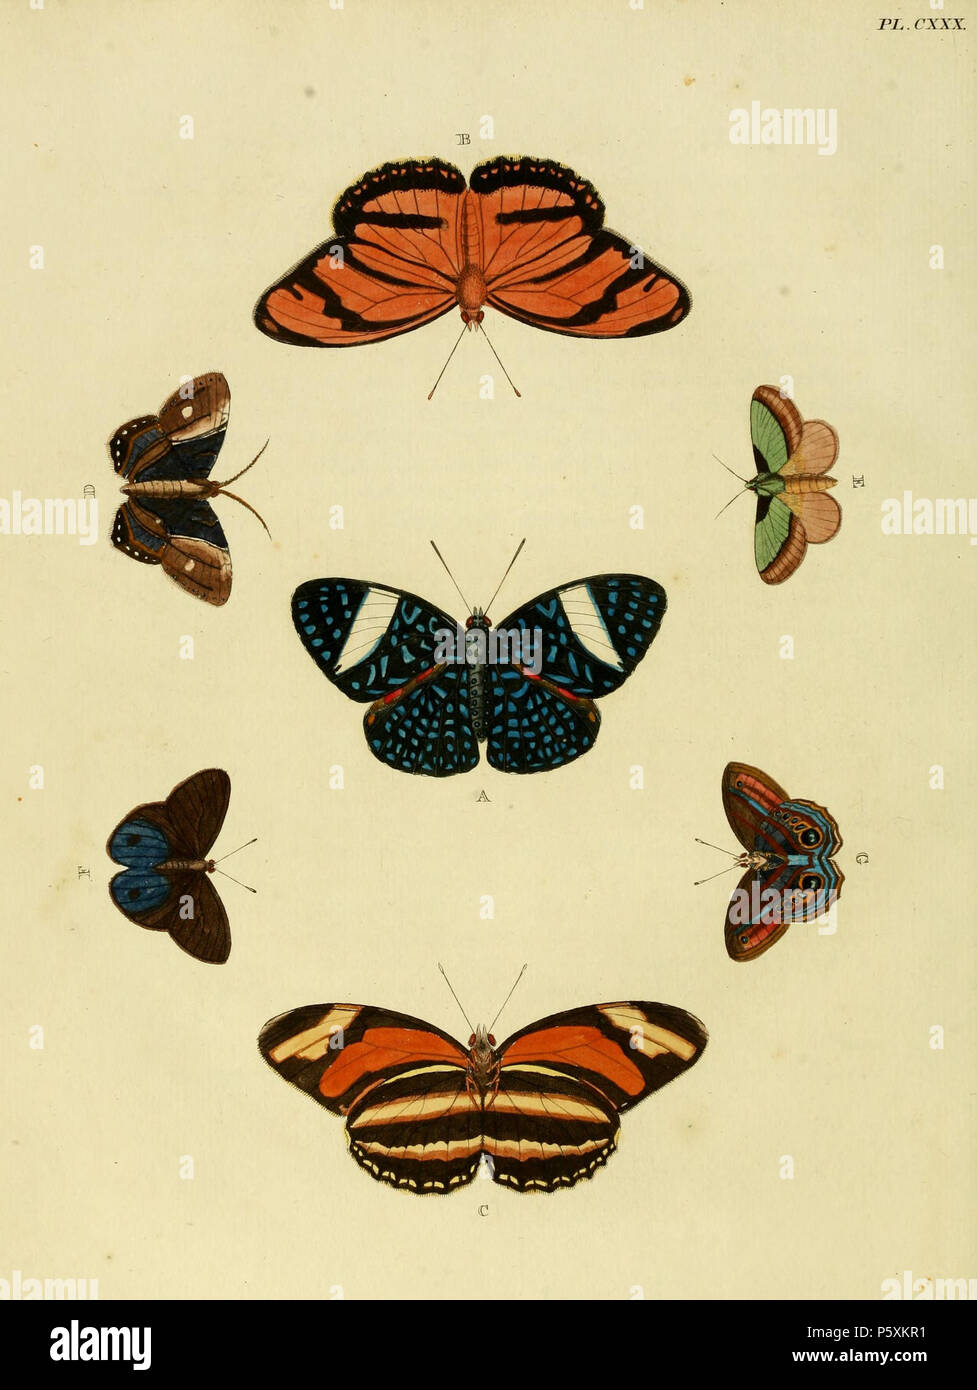 N/A. Plate CXXX A: '(Papilio) Laodamia' ( = Hamadryas arete), Hamadryas laodamia see: Funet B, C: '(Papilio) Phœtusa' ( = Dryadula phaetusa), see Funet 'Phœtusa' (in descr. and register) is an orthographic variation or missp. for 'Phætusa'  D: '(Phalaena) Areos' ( = Habershonia areos, iconotype), see The Global Lepidoptera Names Index, NHM. Photos at Barcode of Life E: '(Phalaena) Lepida' ( = Parasa lepida, iconotype), see The Global Lepidoptera Names Index, NHM F, G: '(Papilio) Tolumnia' ( = Chloreuptychia tolumnia, iconotype), see Funet . 1779. Pieter Cramer (1721 - 1776) and Caspar Stoll (b Stock Photo